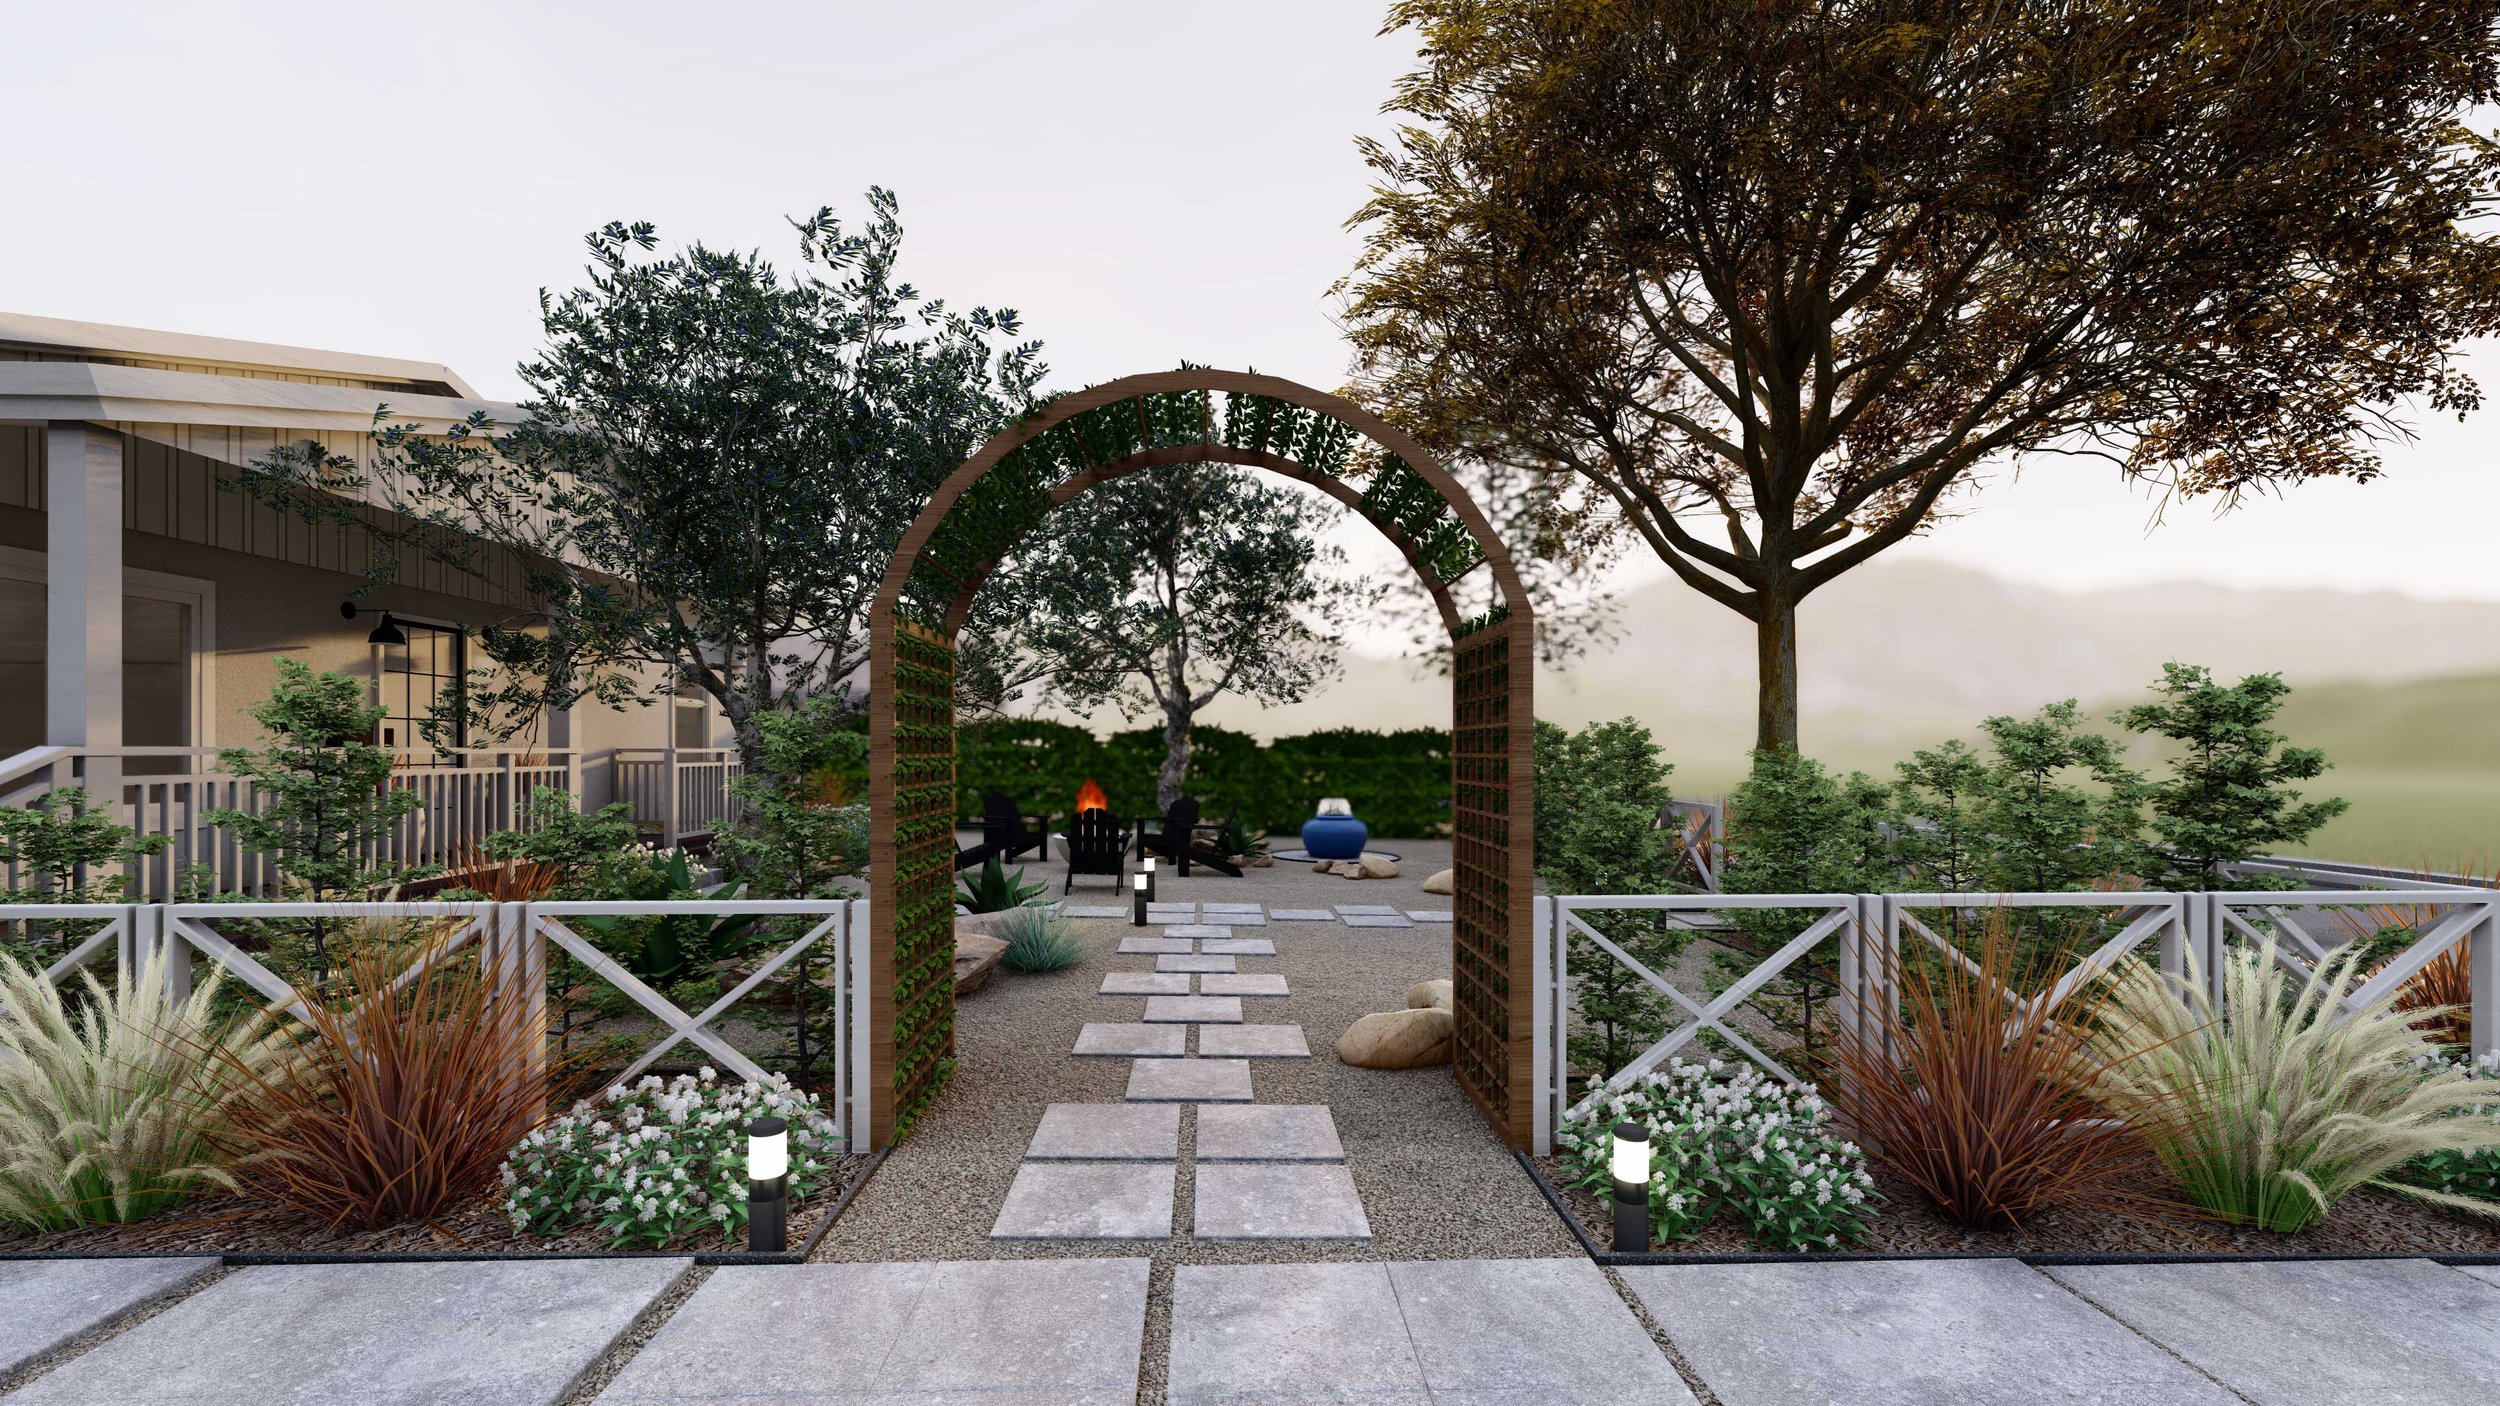  The combination of the arbor and the classic “X” patterned rail fence establish a traditional farm feel, which is counterbalanced by paving and modern details like the streamlined path lights. 